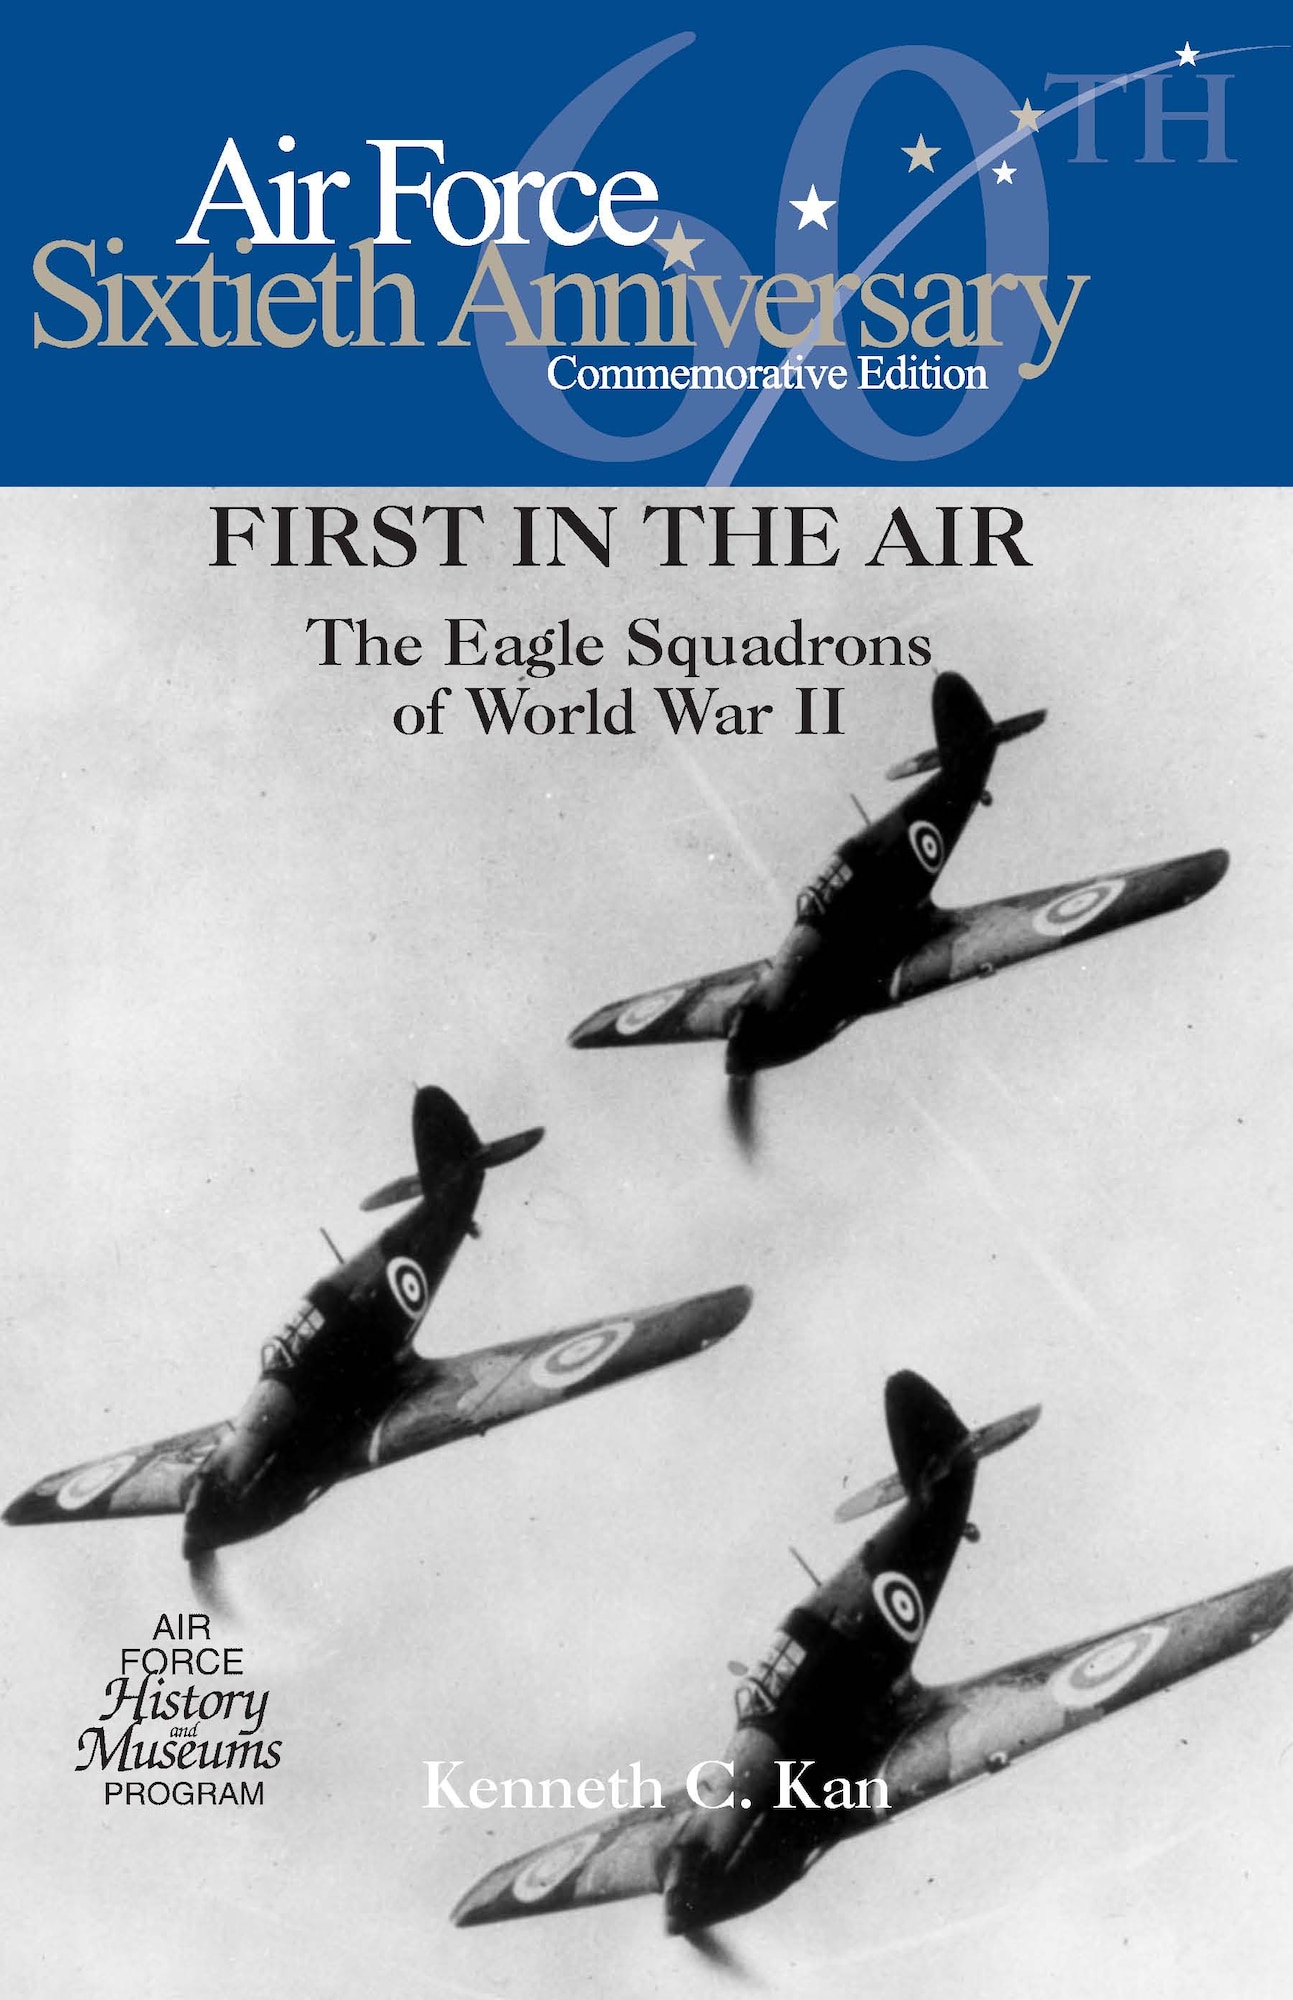 First in the Air: the Eagle Squadrons of World War II by Kenneth C. Kan